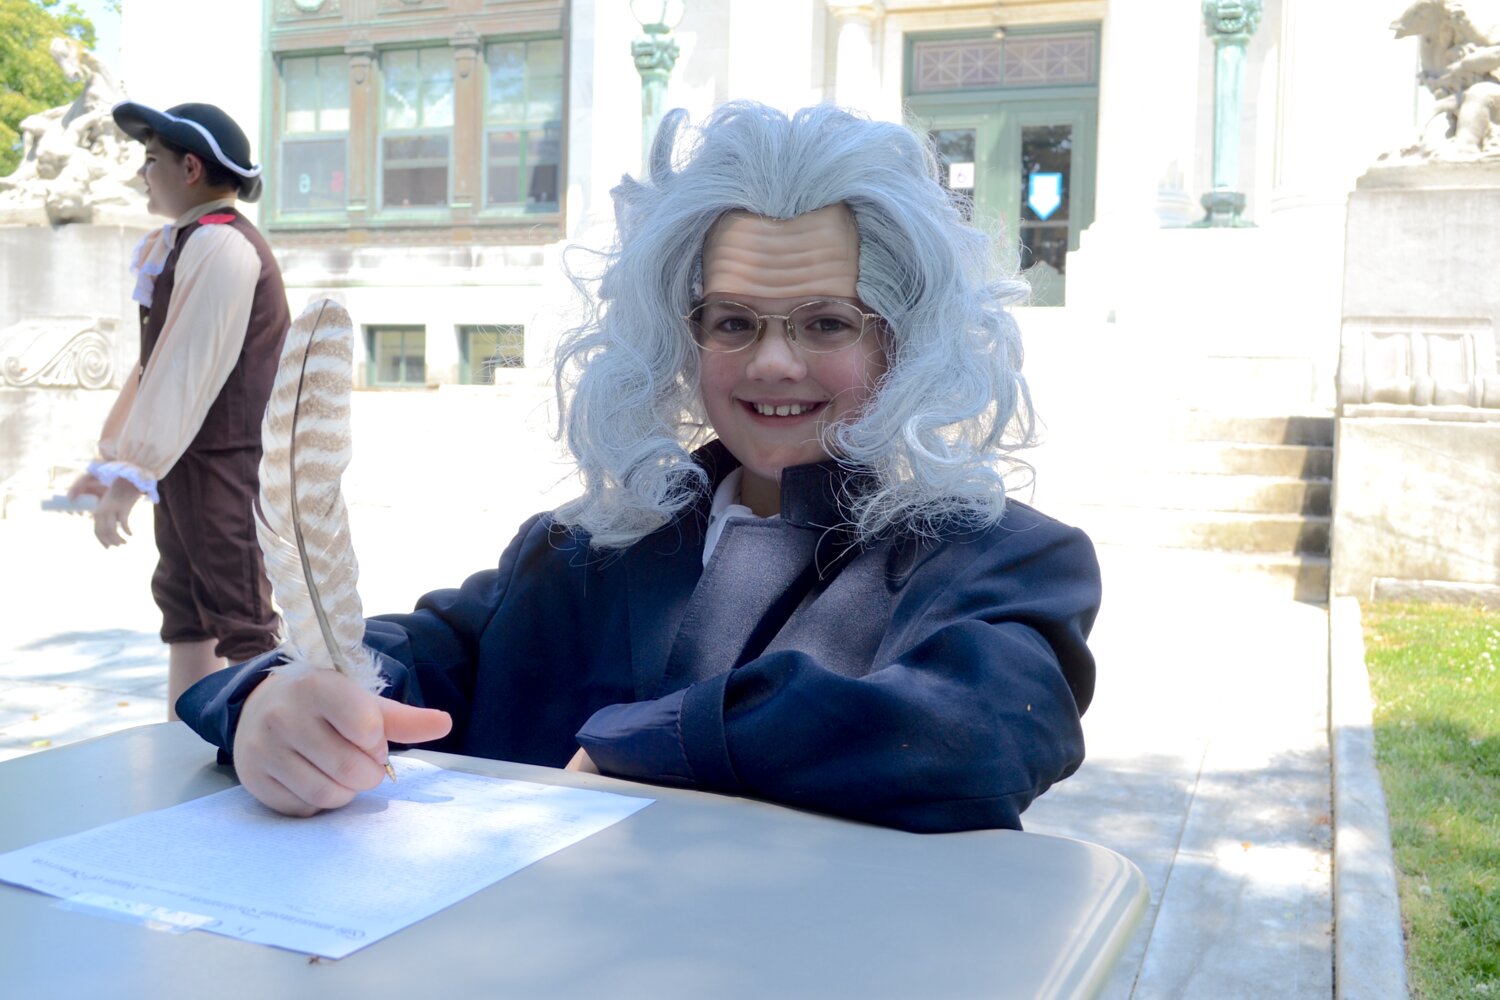 Ben Campbell portrays Benjamin Franklin, complete with a desk and a quill pen to enable him to perform his important duties as a Founding Father.